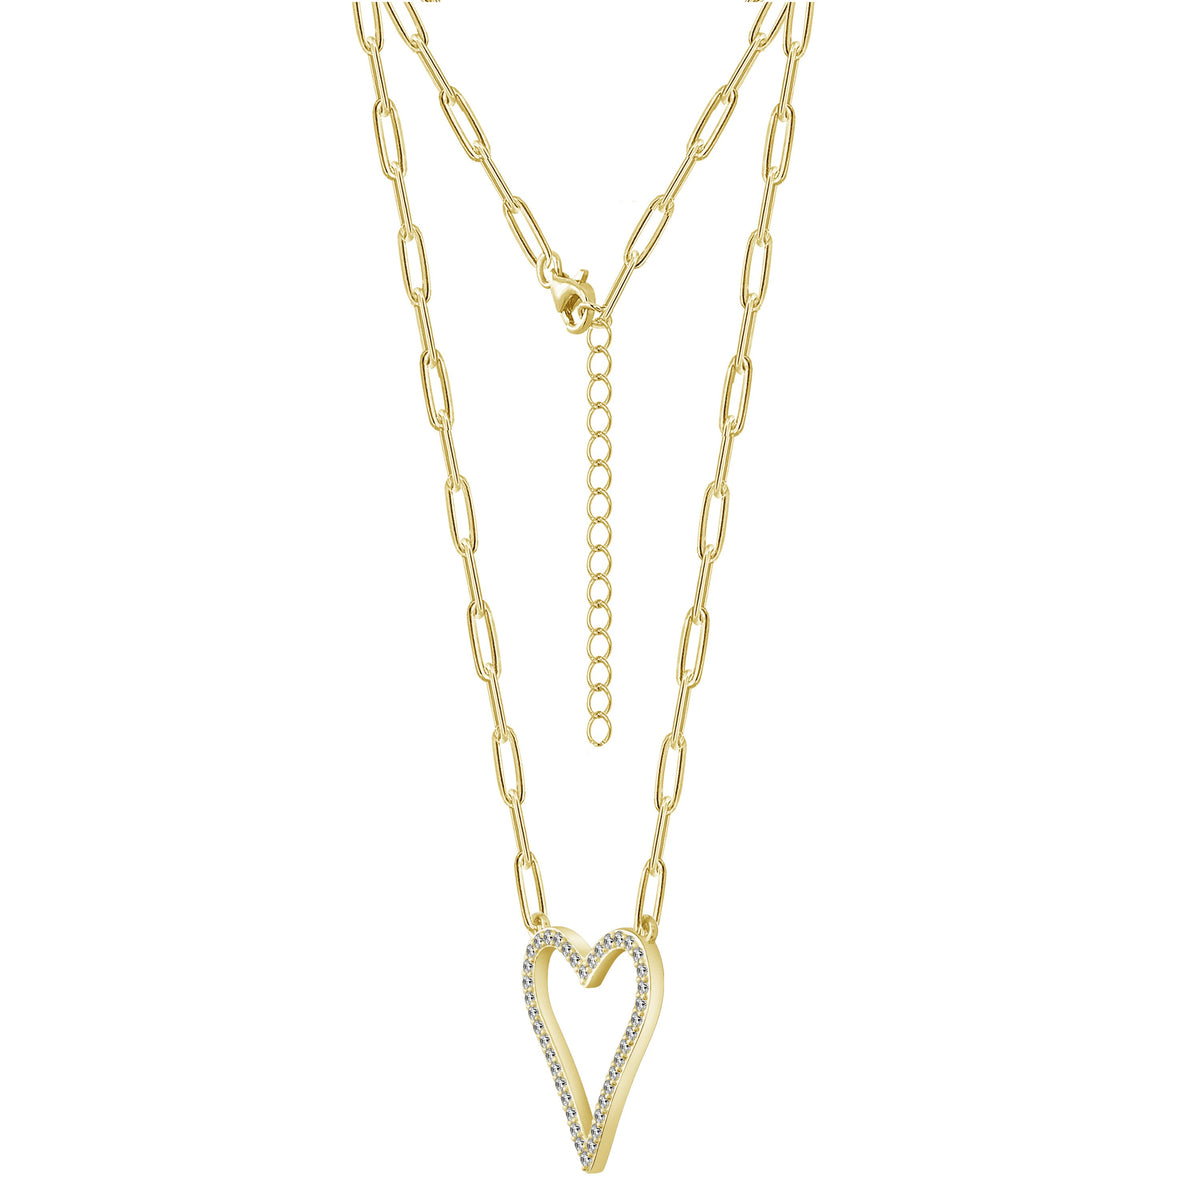 Yellow Gold Heart Necklace